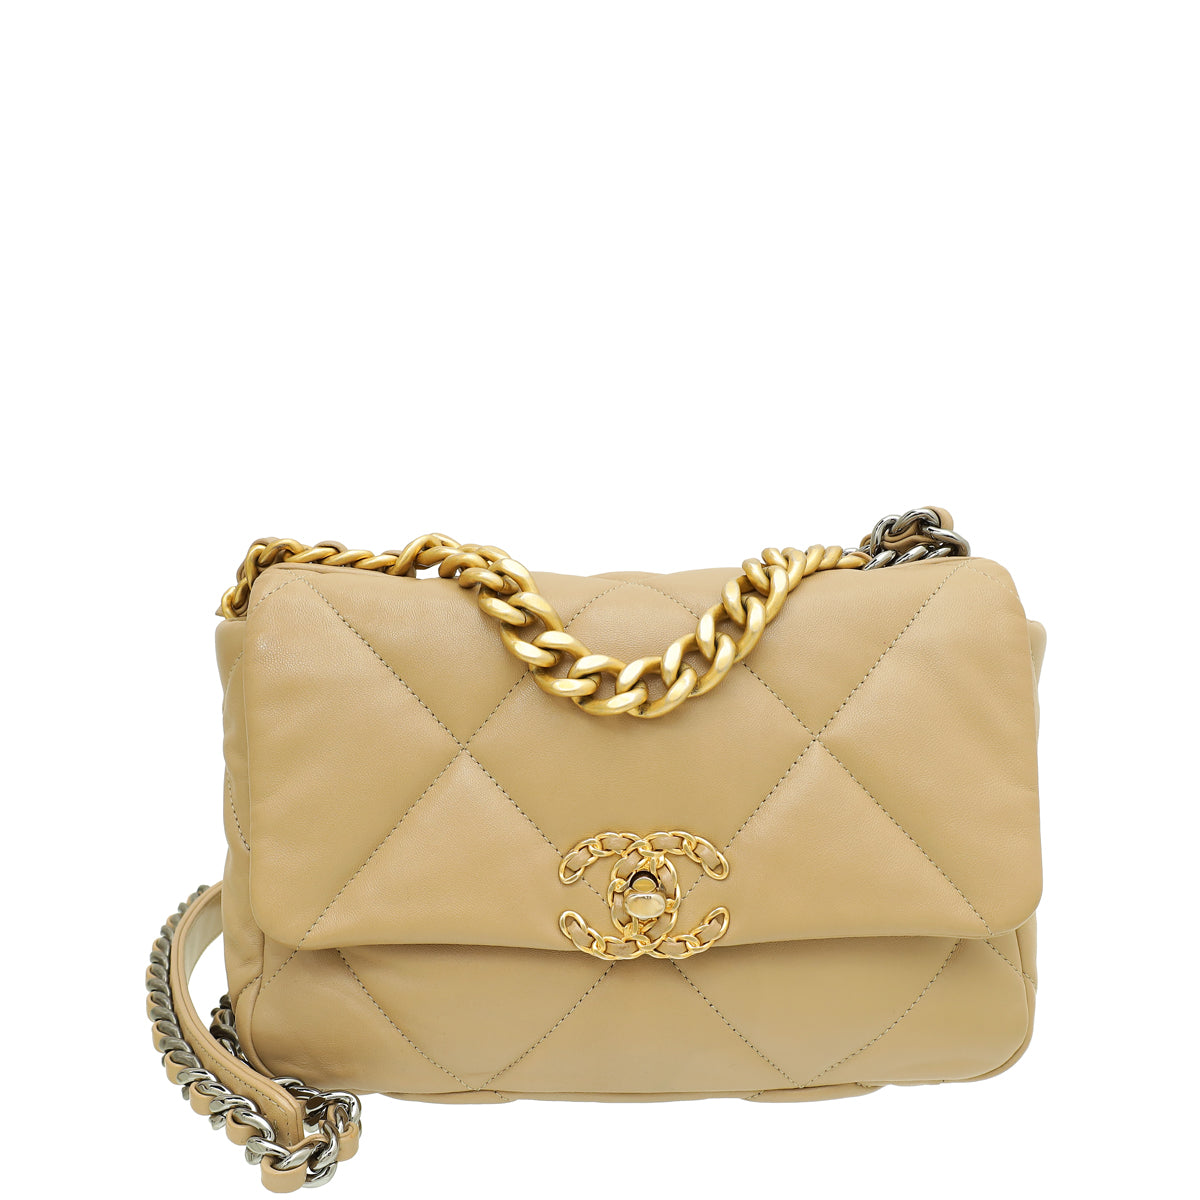 Chanel Beige 19 Small Flap Bag